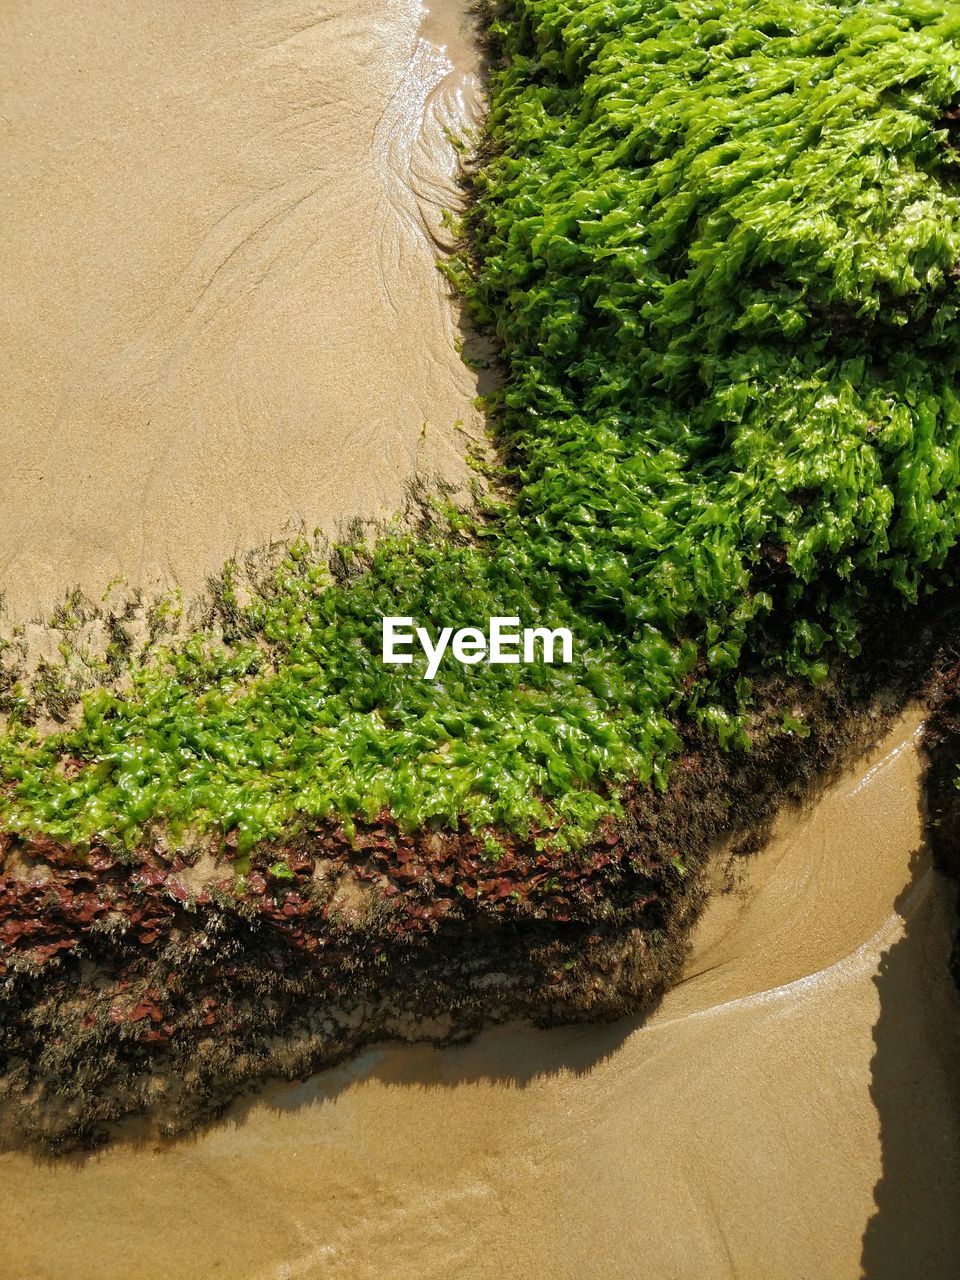 PLANTS GROWING IN SAND AT BEACH